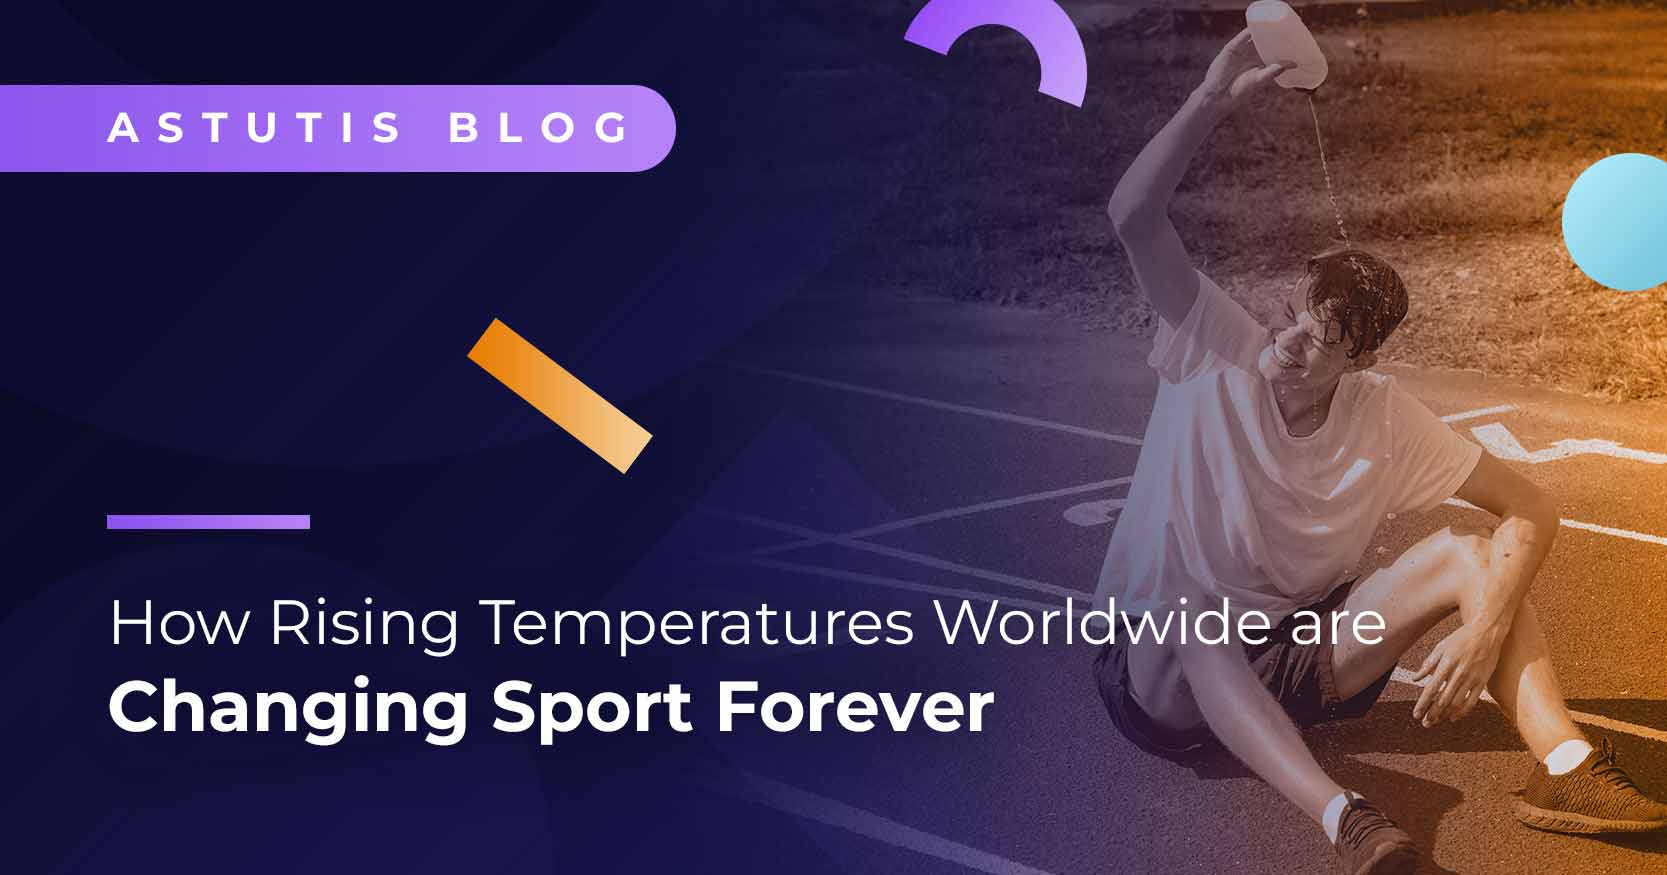 How Rising Temperatures Worldwide Are Changing Sport Forever Image